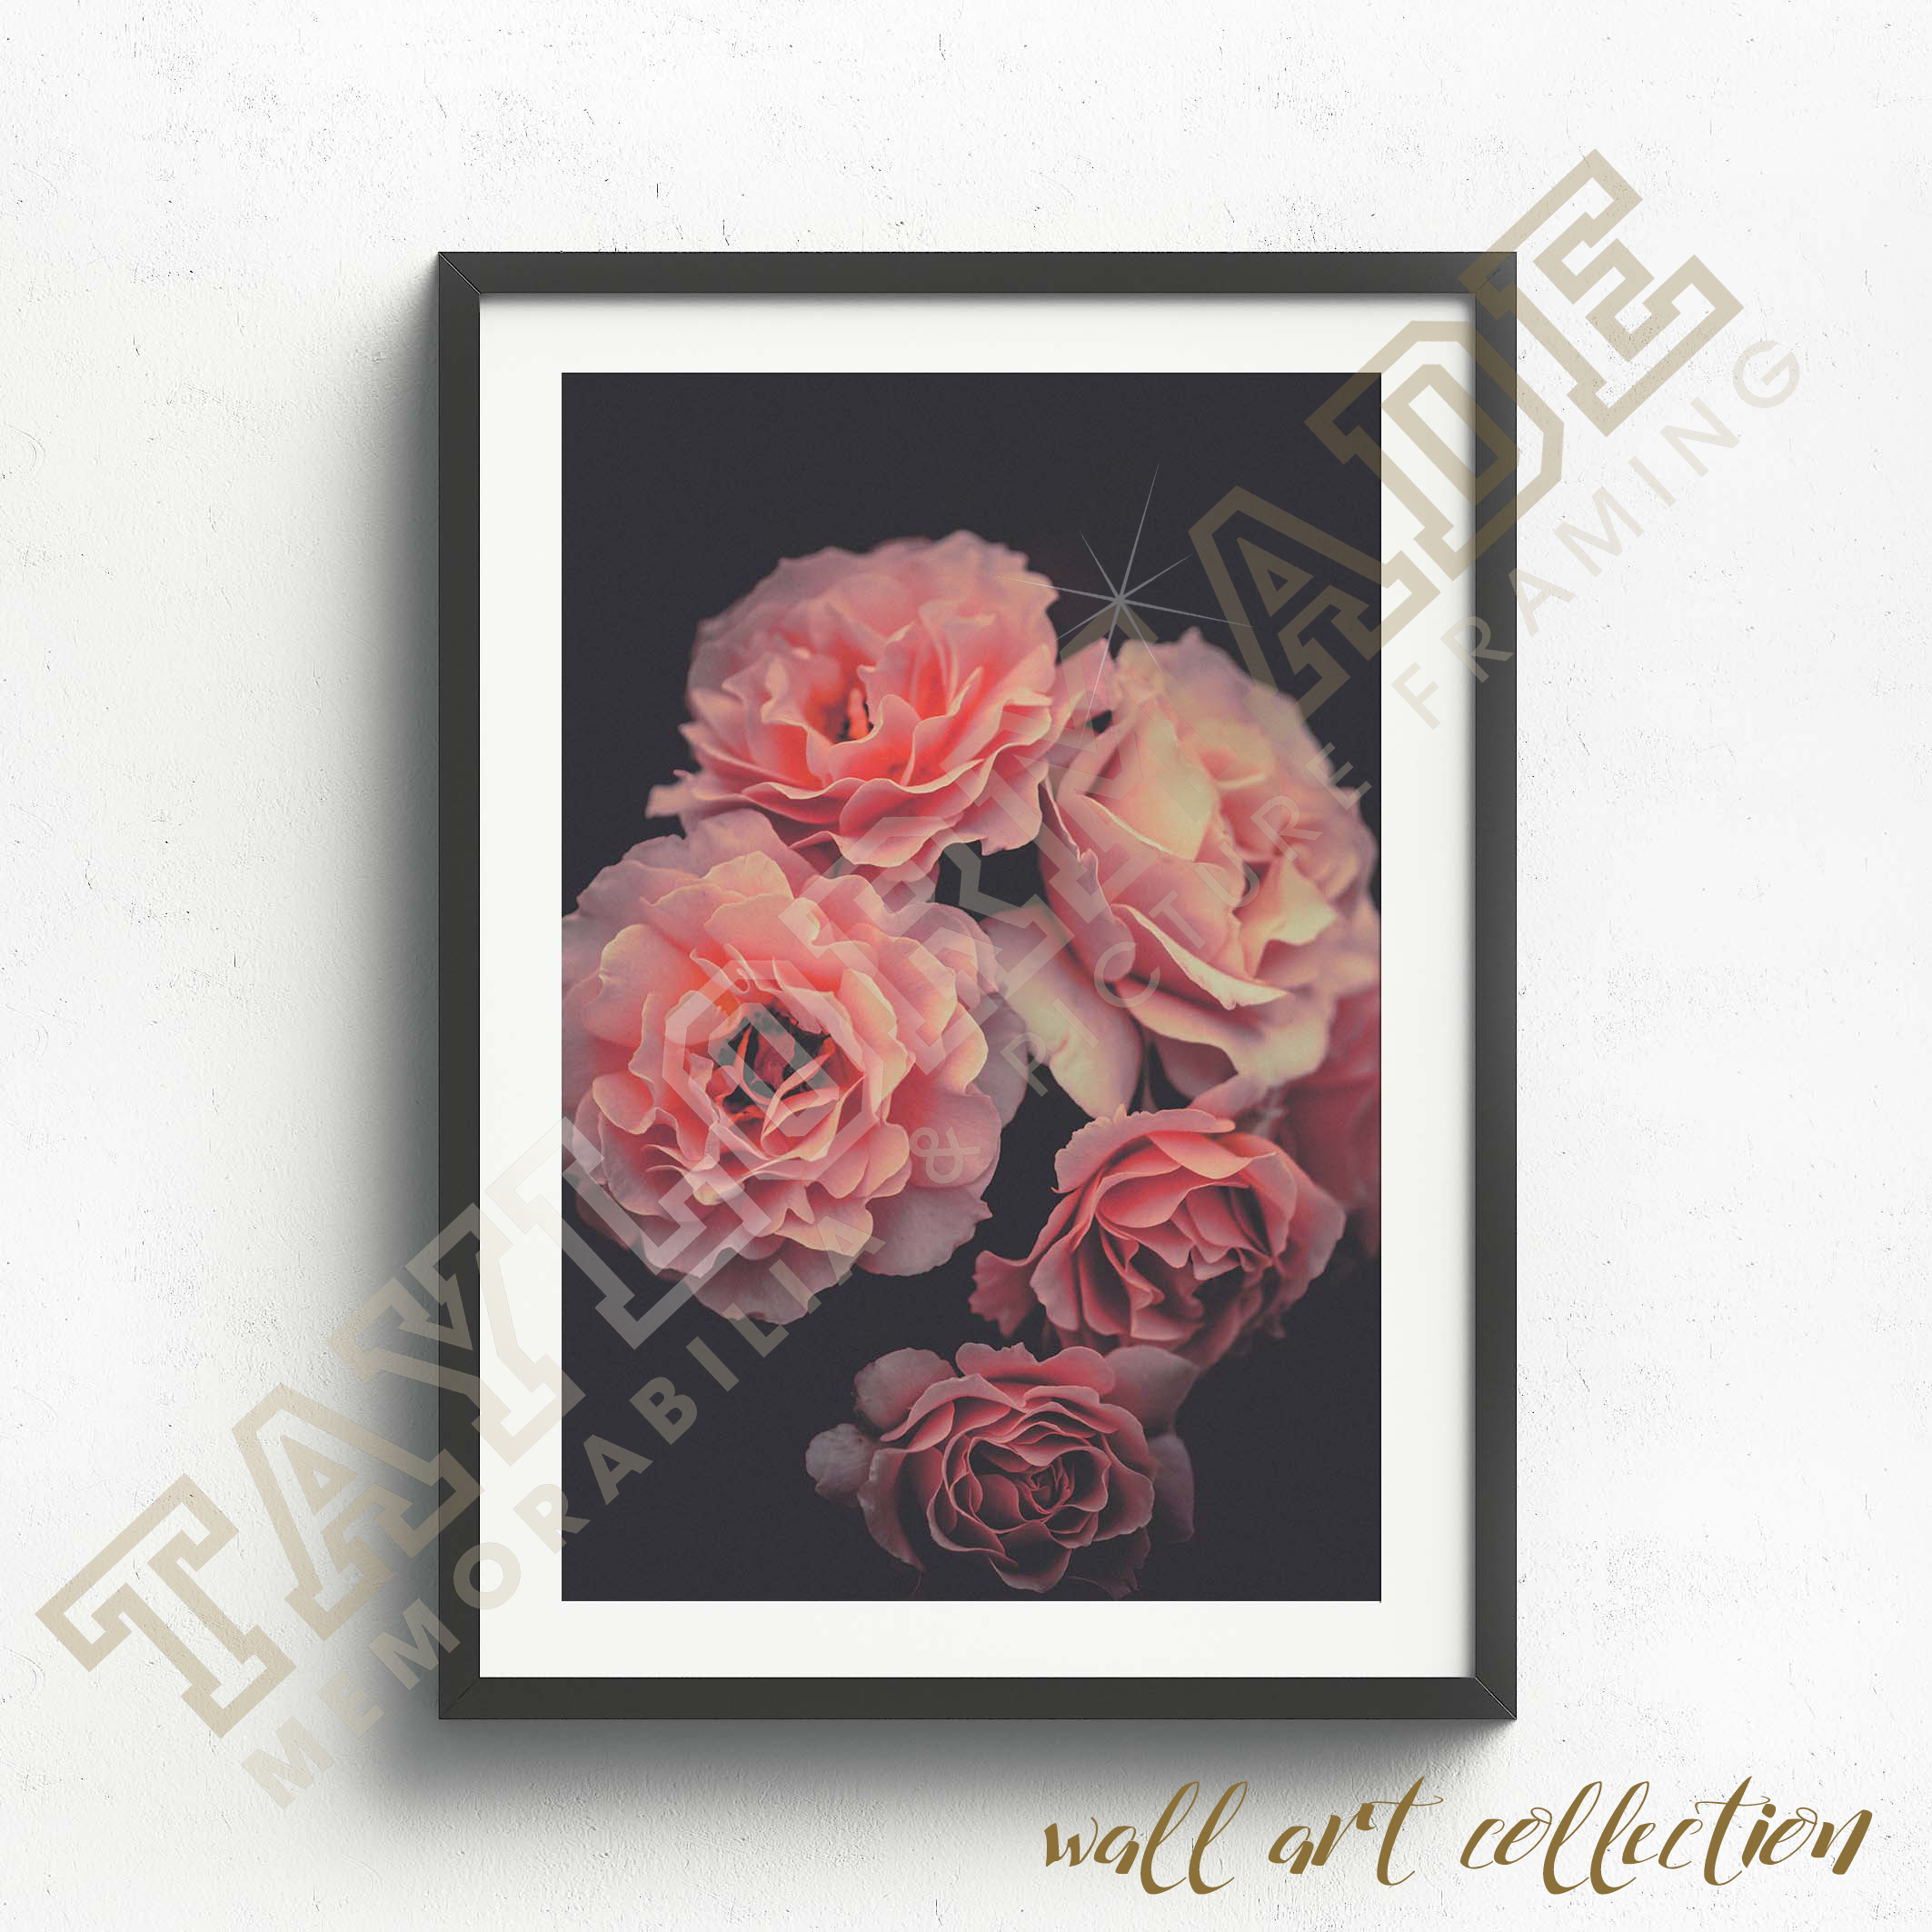 Wall Art Collection – Floral Bouquet